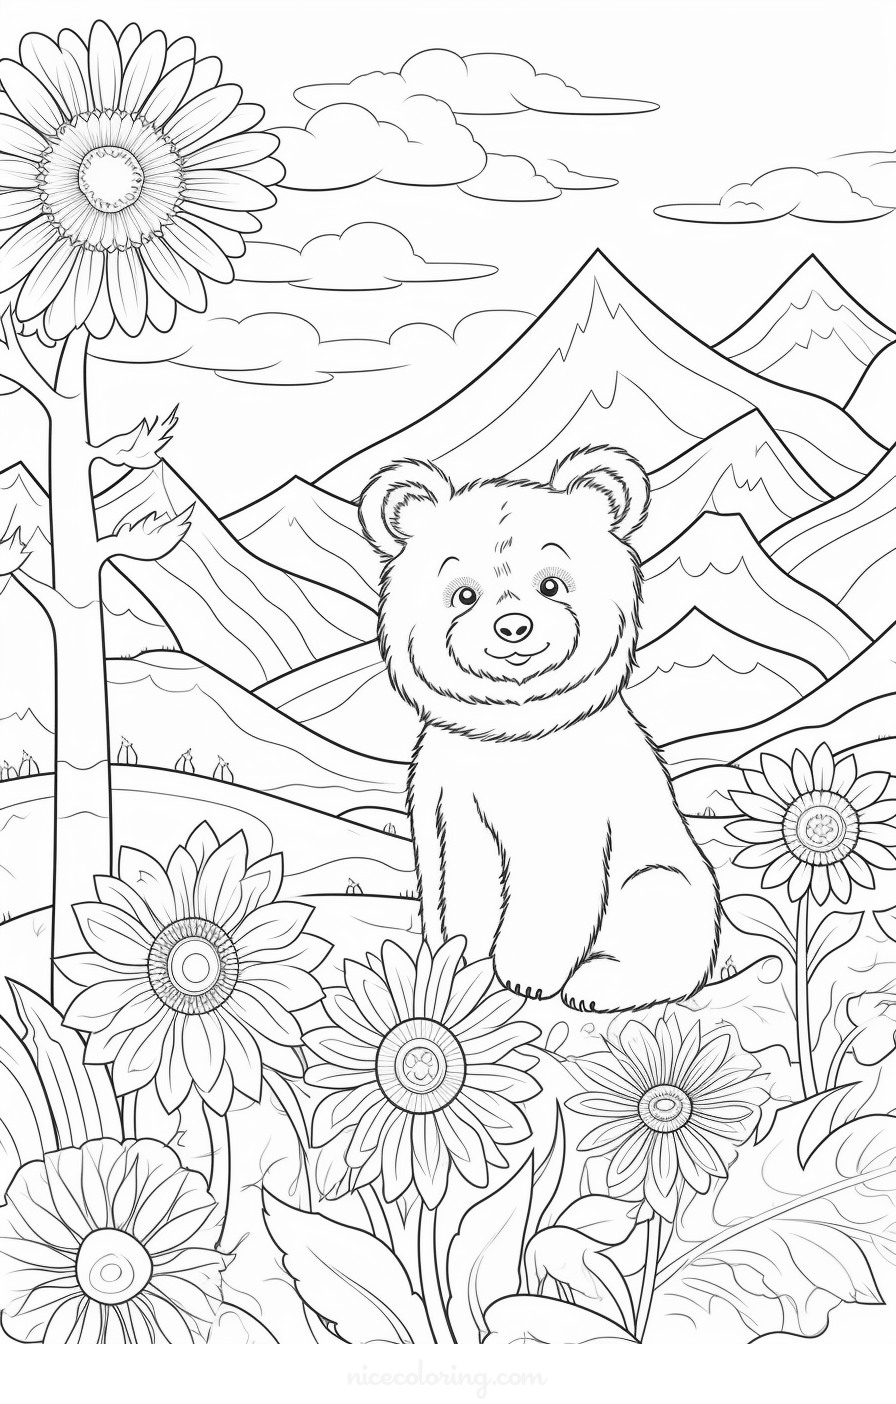 Bear family in the woods coloring page